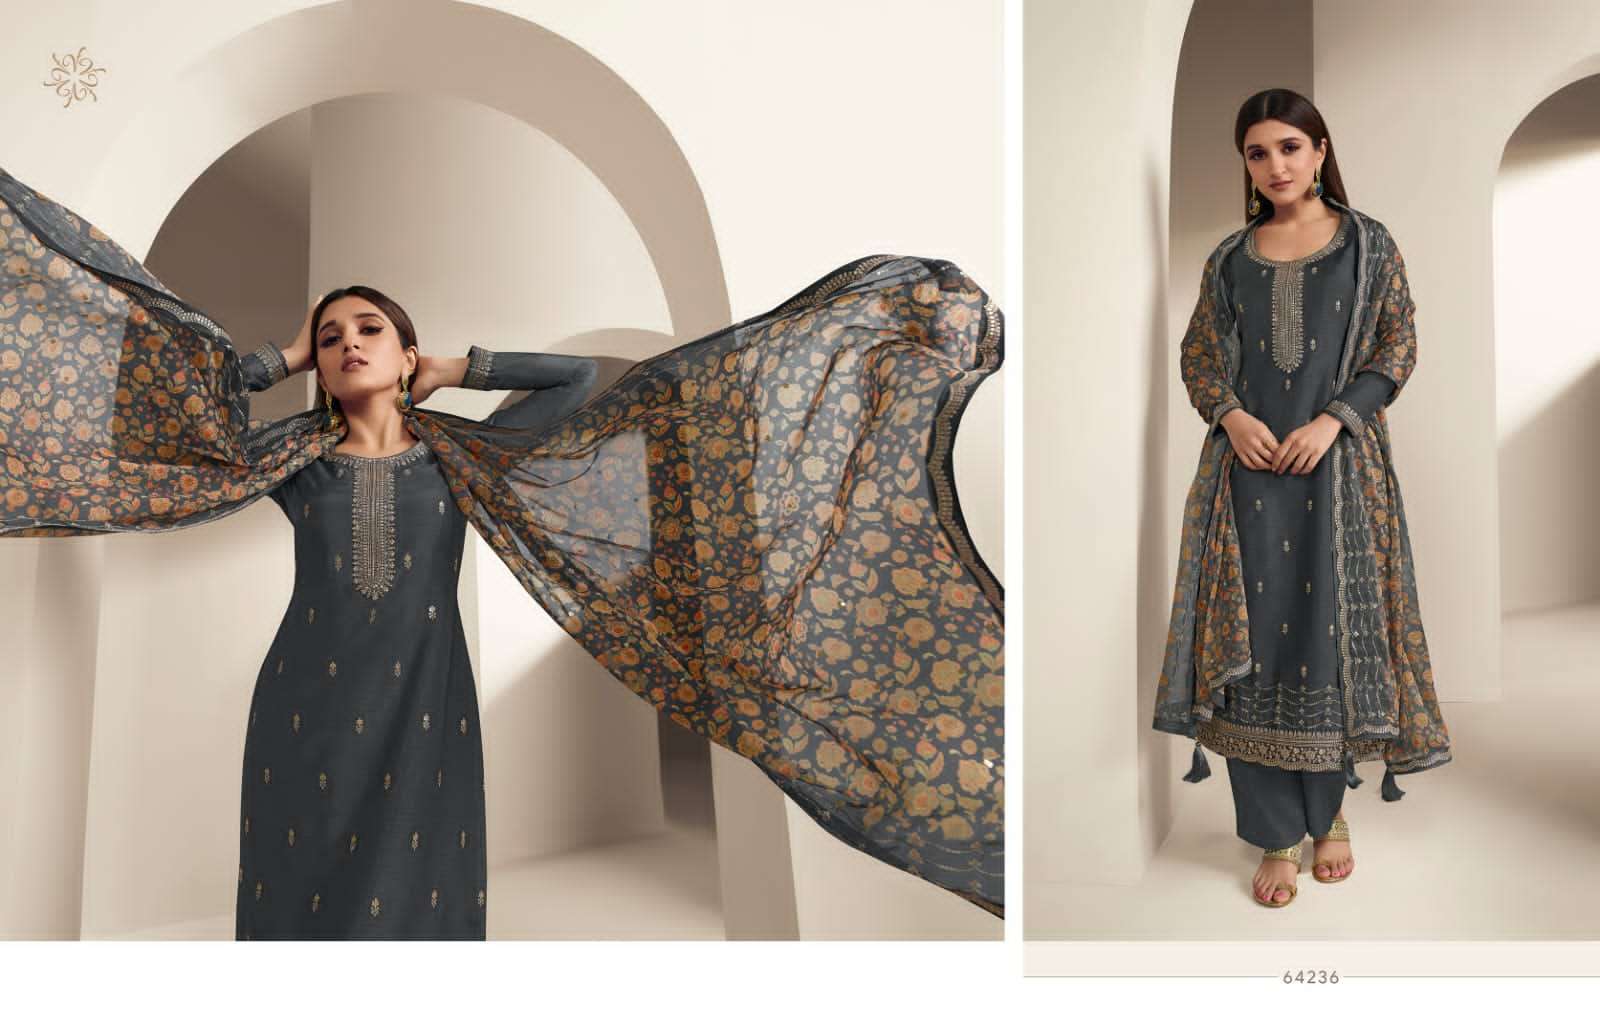 Kaseesh Aashna Vol-2 By Vinay Fashion 64231 To 64238 Series Beautiful Festive Suits Colorful Stylish Fancy Casual Wear & Ethnic Wear Dola Silk Print Dresses At Wholesale Price